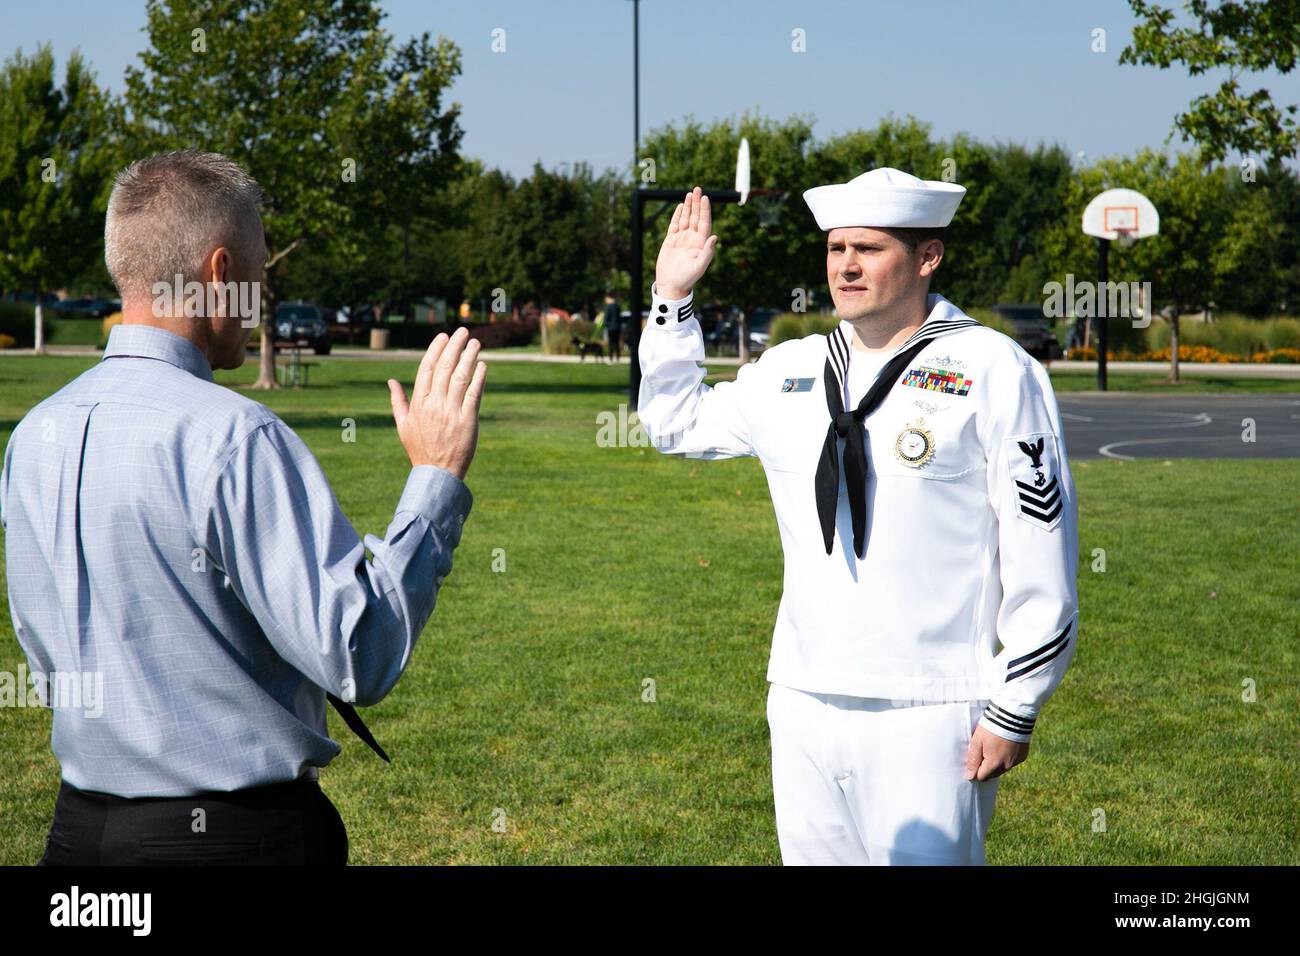 MERIDIAN, ID - Navy Talent Acuisition Group Portland talent scout, First Class Navy Counselor Nicholas Humbert, recites the oath of enlistment, read by his father Robert Humbert, during a ceremony at Kleiner Park in Meridian, Idaho. The NTAG Portland Commanding Officer, Commander Brent Banks, presided over the re-enlistment ceremony. NC1 Humbert is a talent scout out of Navy Recruiting Station Boise, Idaho. (Navy photo by Dan Rachal/NTAG Portland Public Affairs) Stock Photo